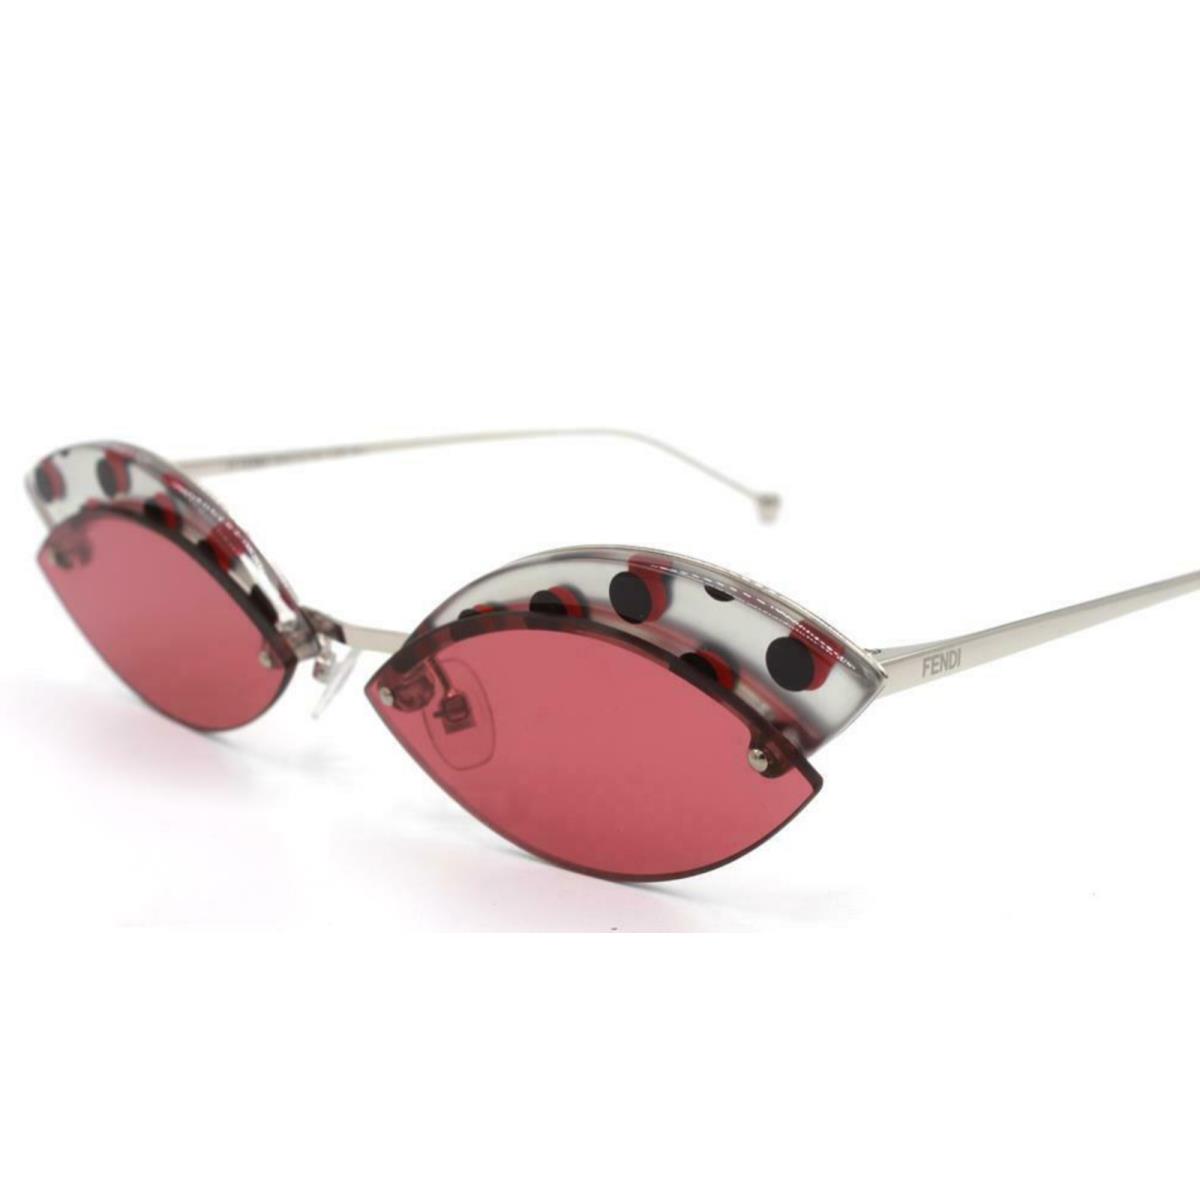 Fendi sunglasses  - Silver with Polka Dot , Silver with Polka Dot Rims Frame, Red Cherry Lens